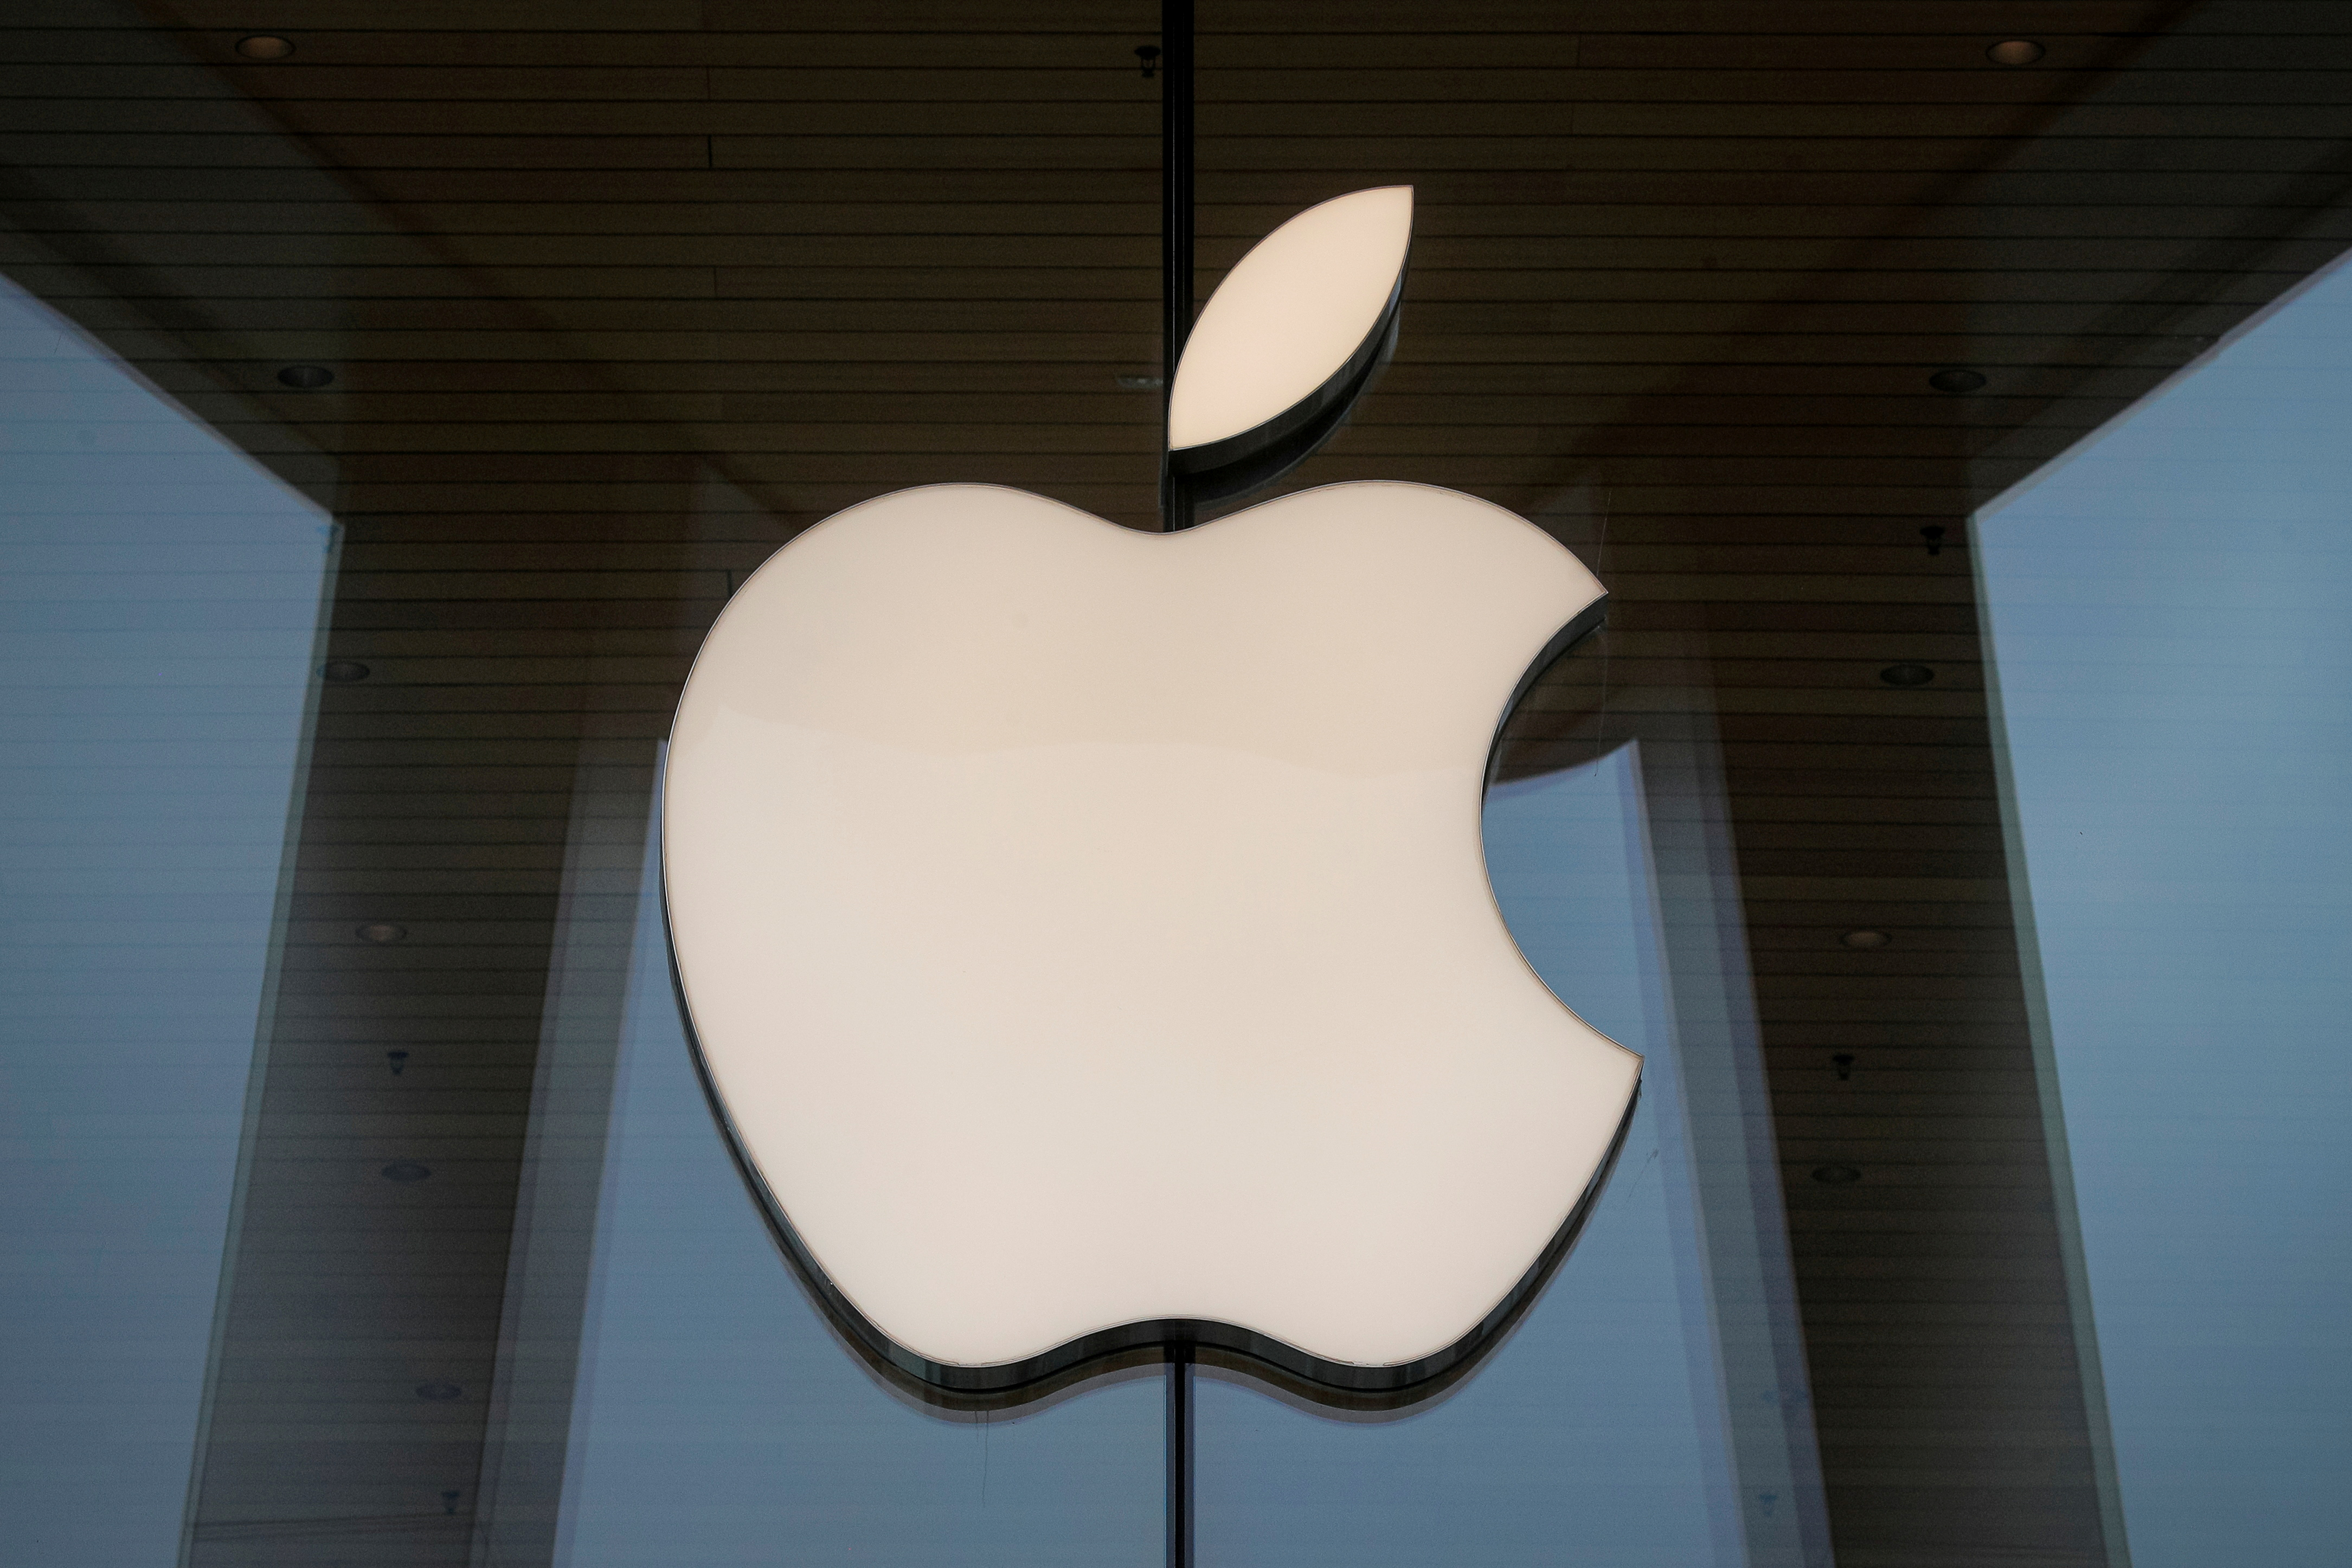 The Apple logo is seen at an Apple Store, as Apple's new 5G iPhone 12 went on sale in Brooklyn, New York, U.S. October 23, 2020.  REUTERS/Brendan McDermid/File Photo